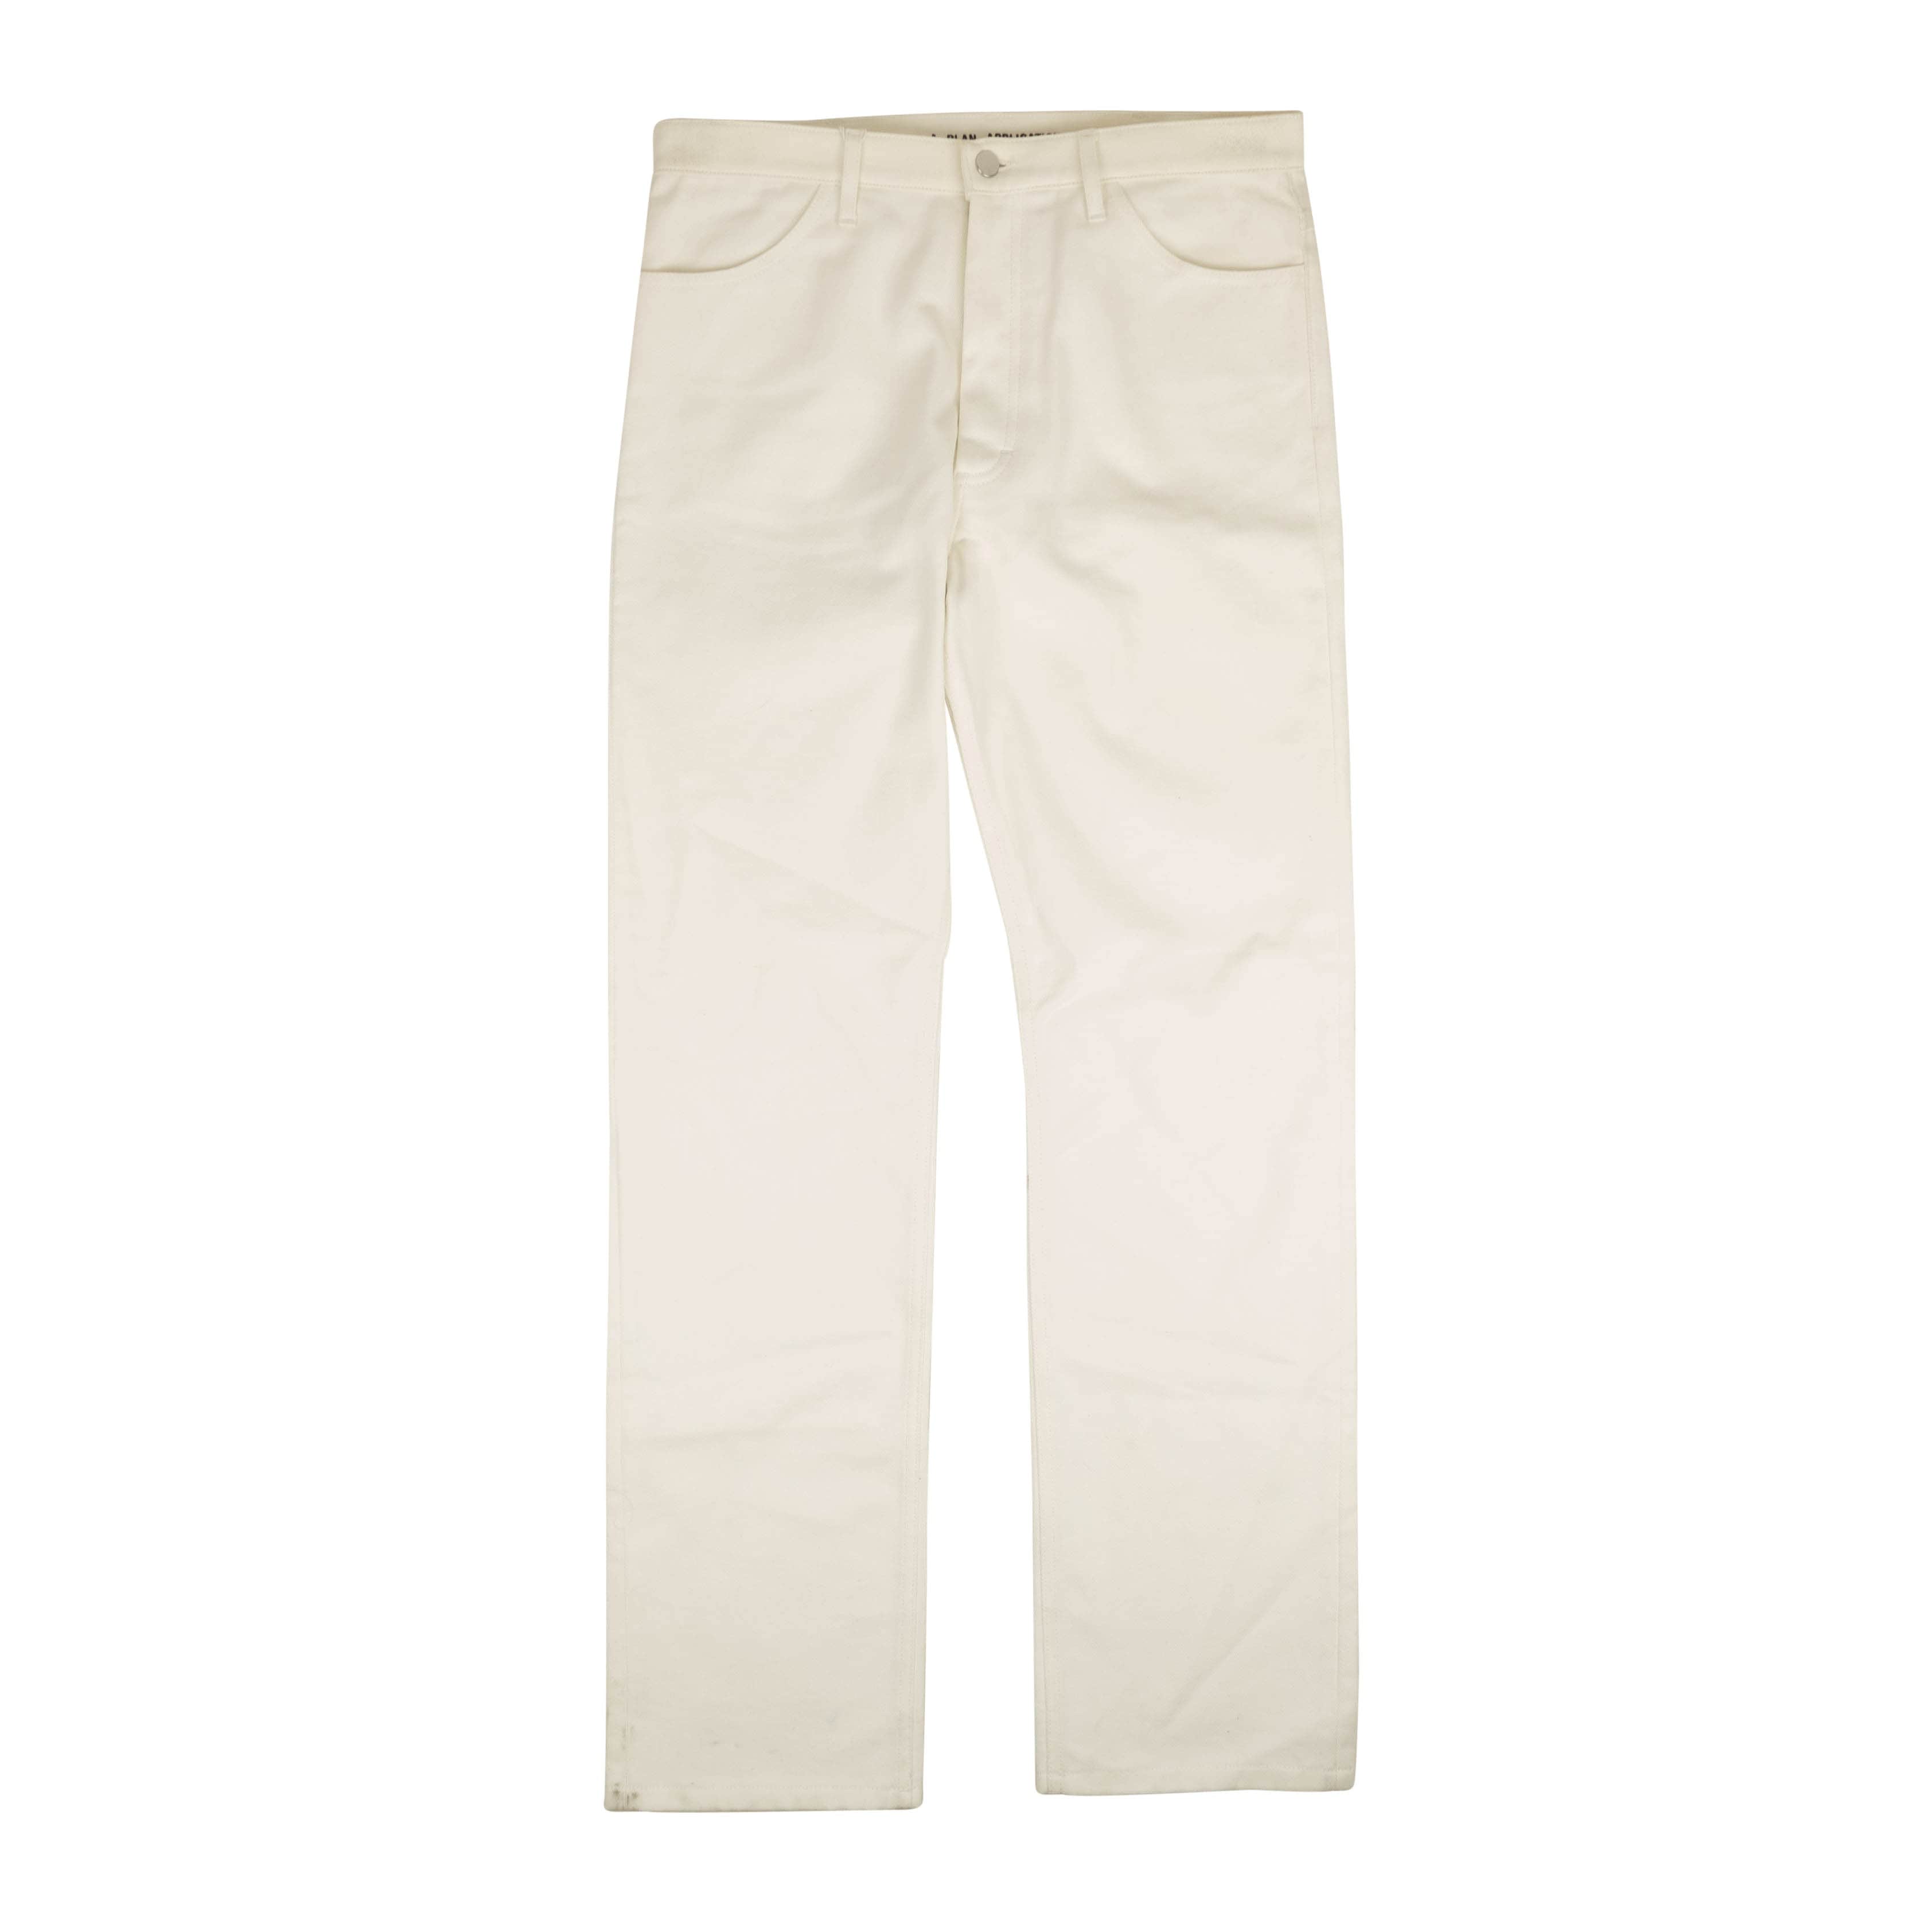 A_Plan_Application a_plan_application, channelenable-all, chicmi, couponcollection, gender-mens, main-clothing, mens-shoes, mens-straight-fit-jeans, size-32, under-250 32 White Cotton Embroidered Waist Jeans 74NGG-AP-1031/32 74NGG-AP-1031/32